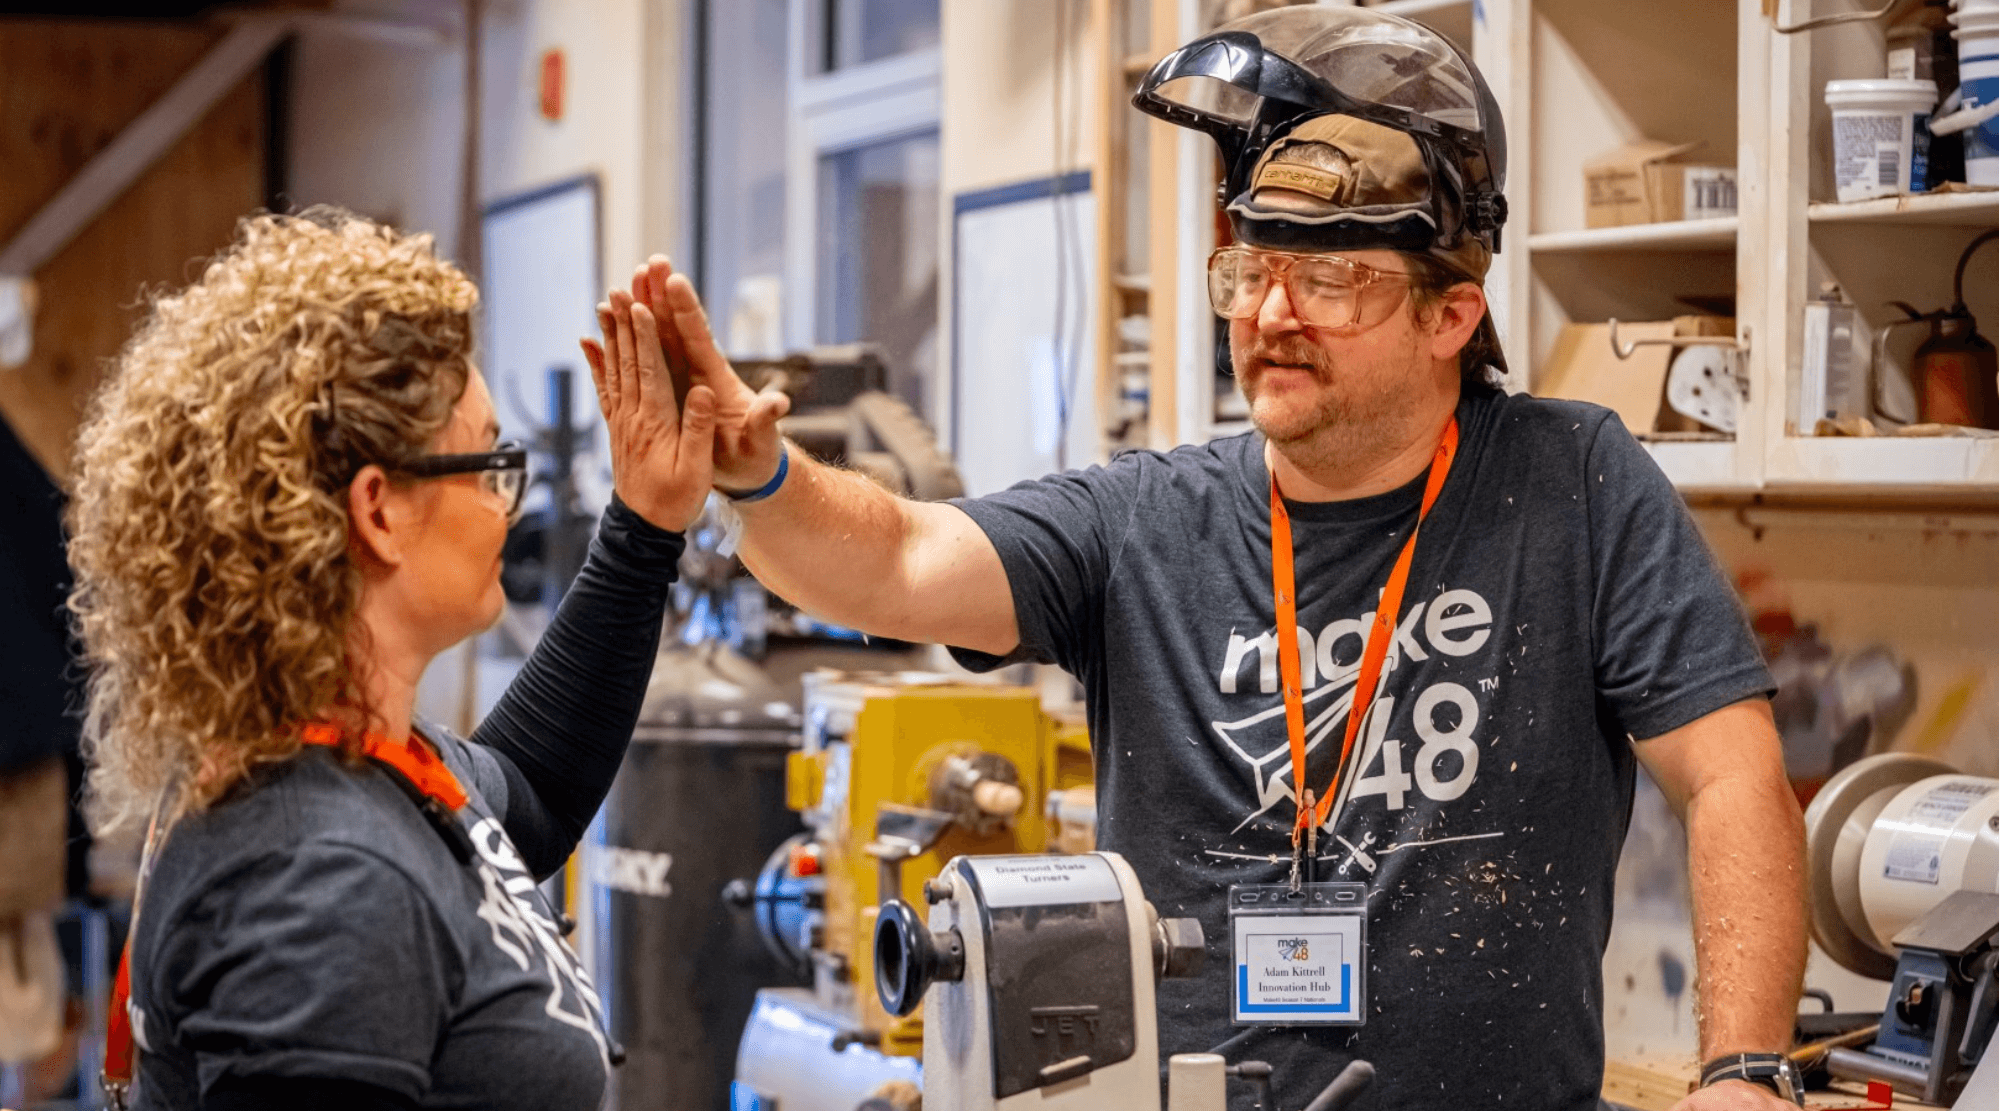 Make48 Participants high five after completing a woodworking project.